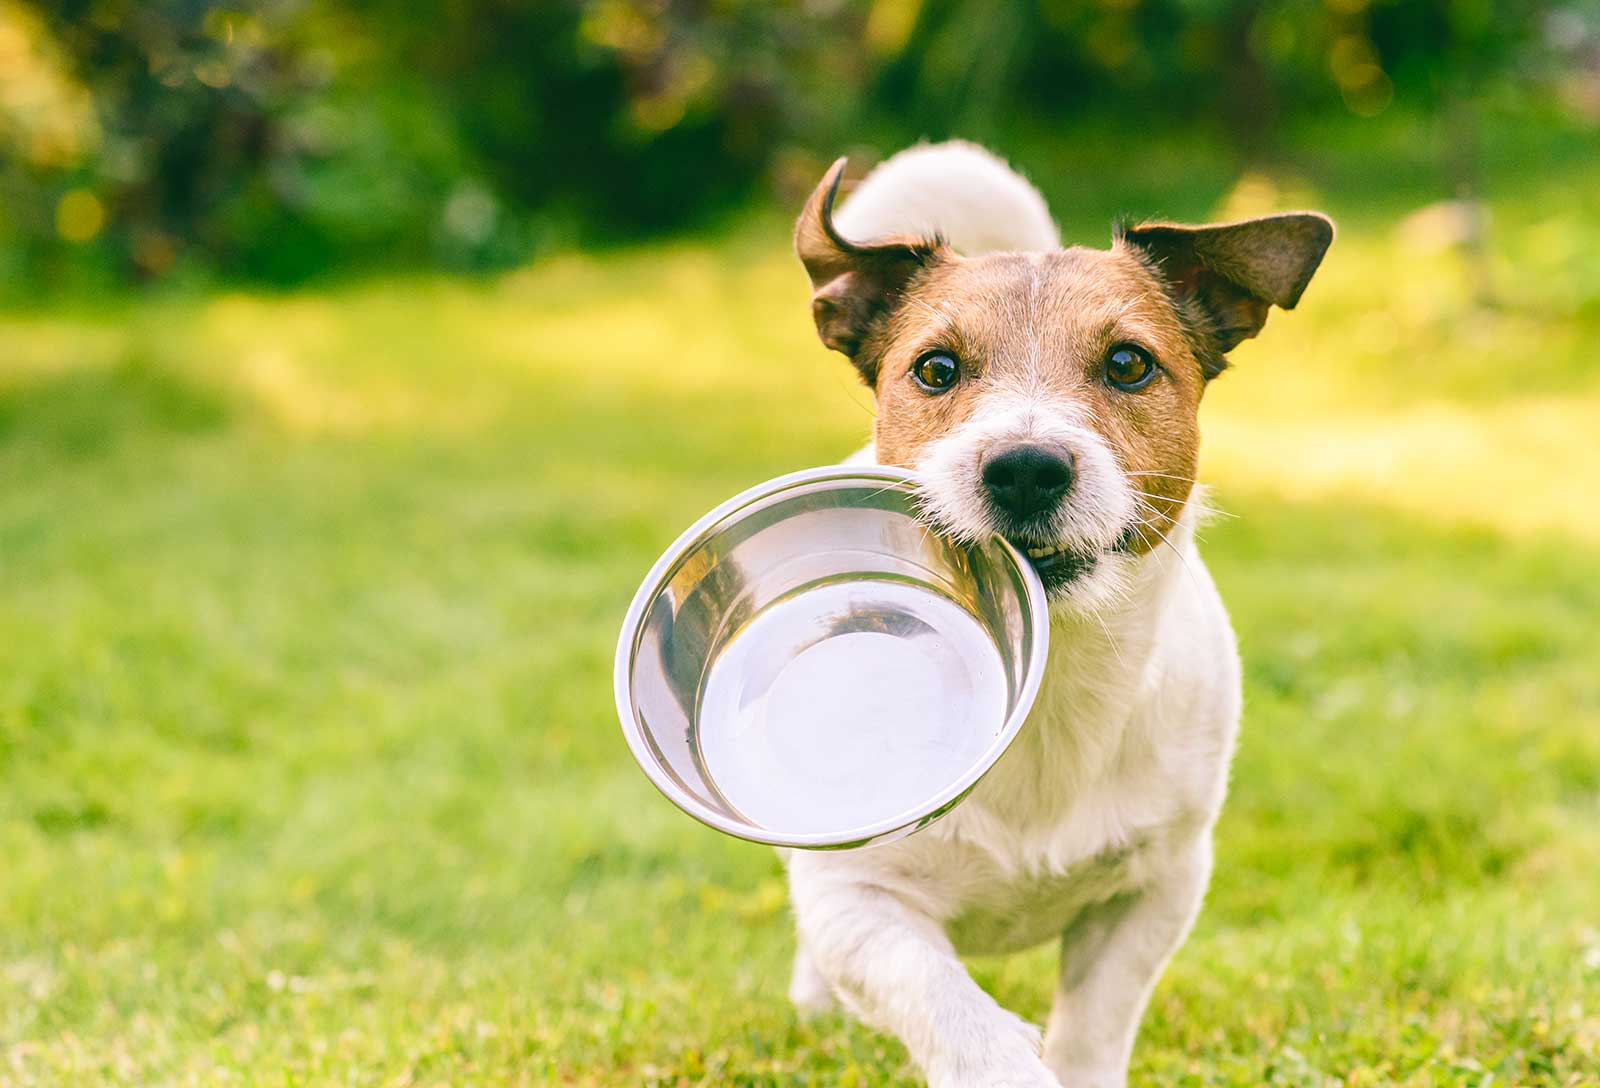 dog running with food bowl in its mouth